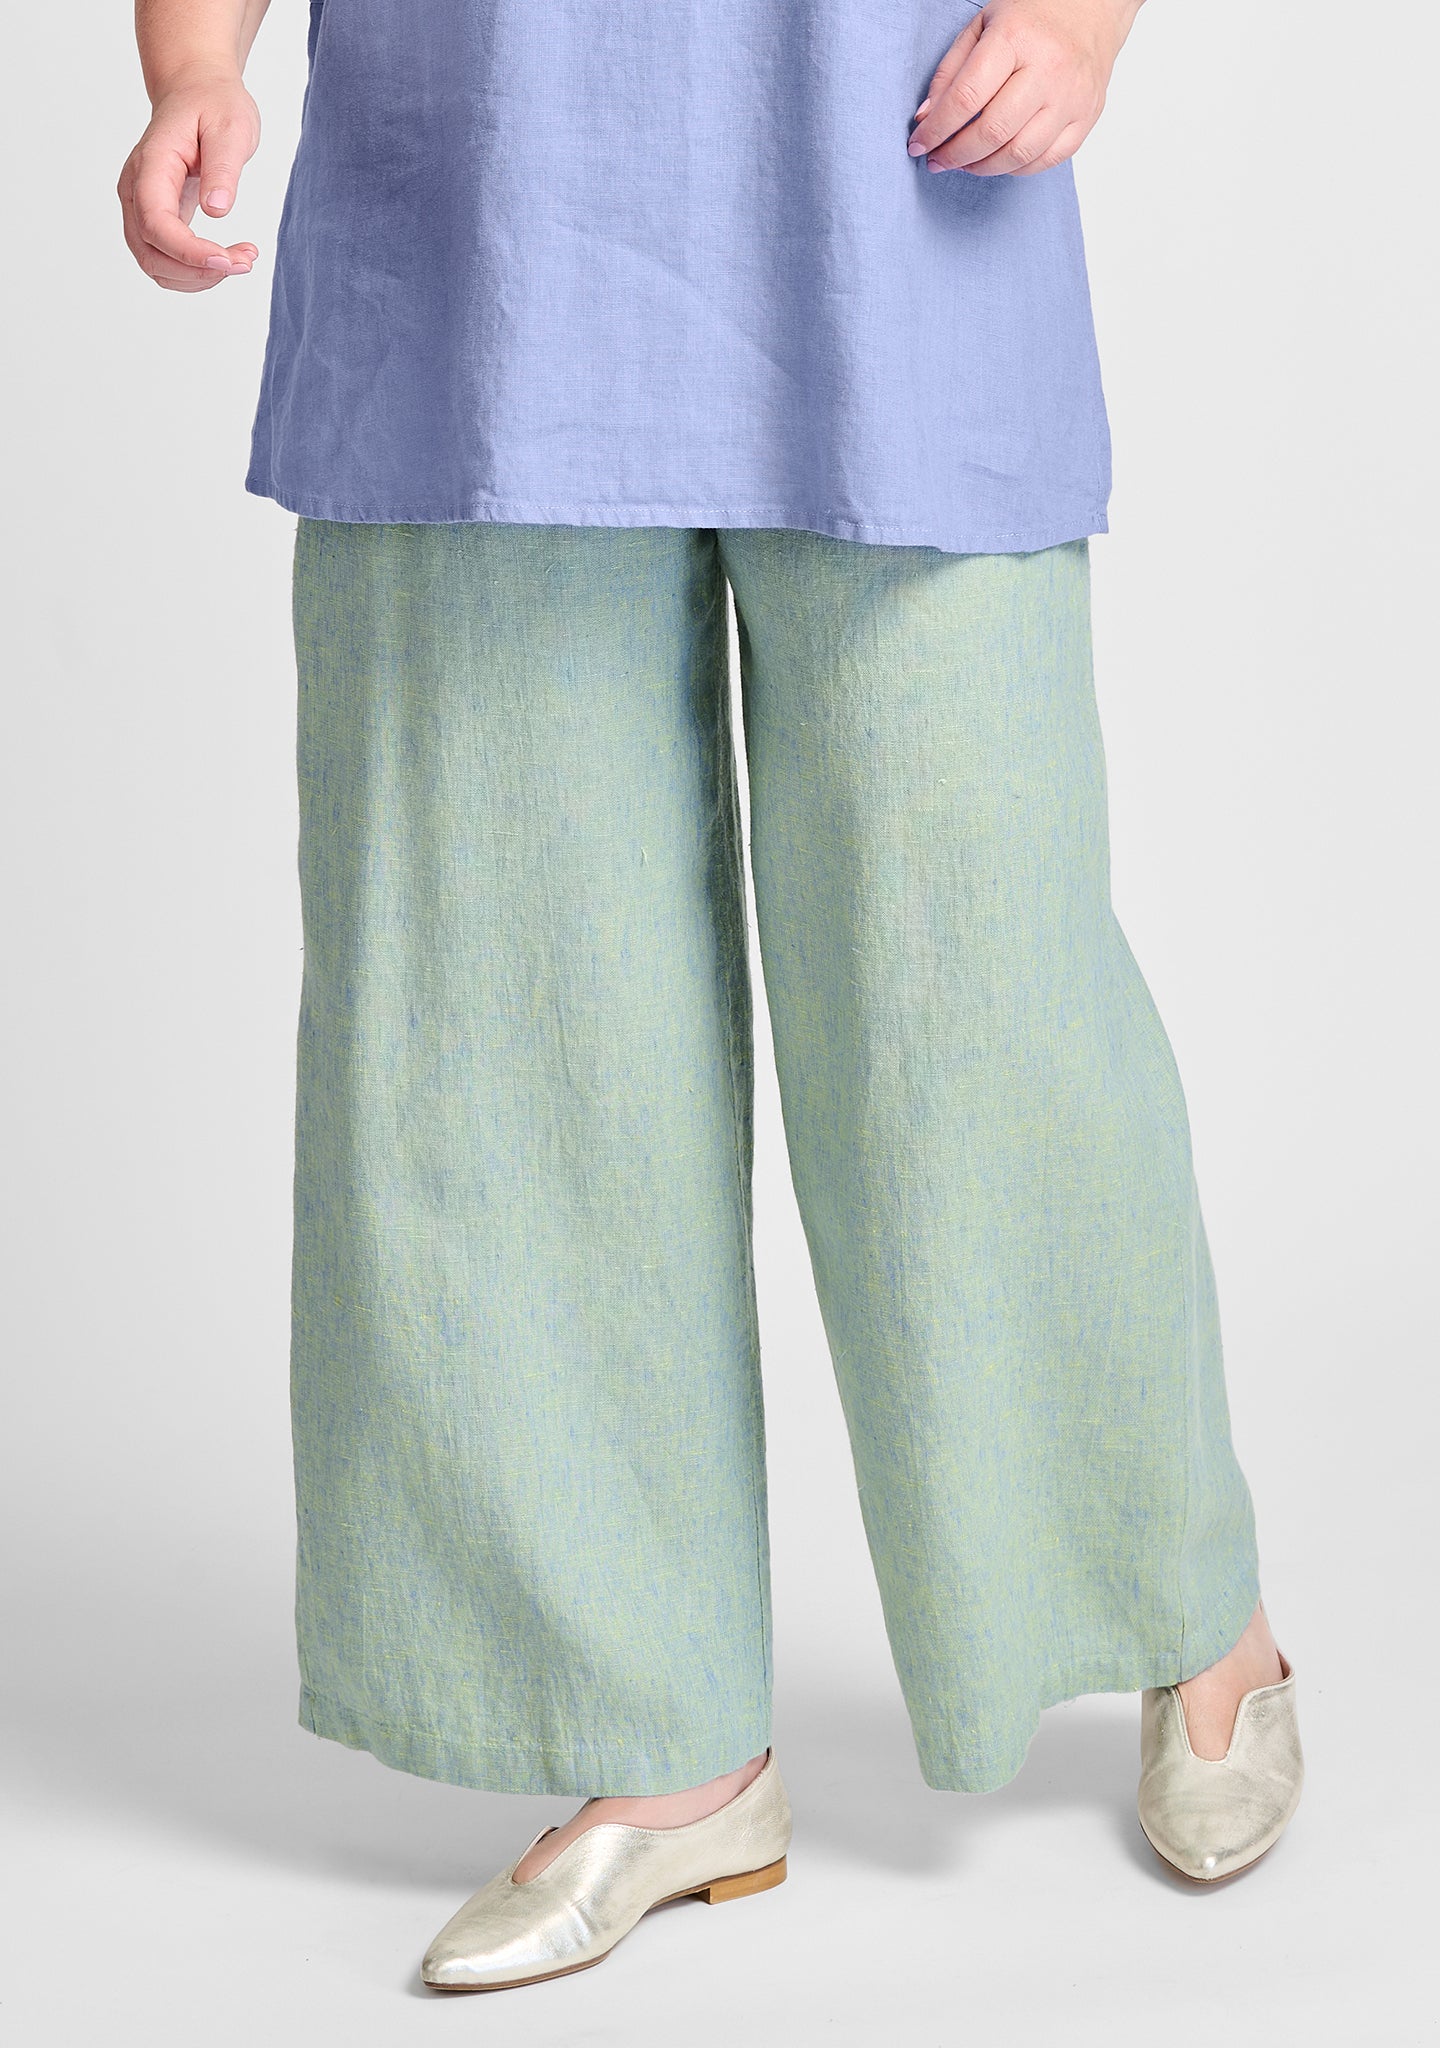 flowing pant linen pants with elastic waist green